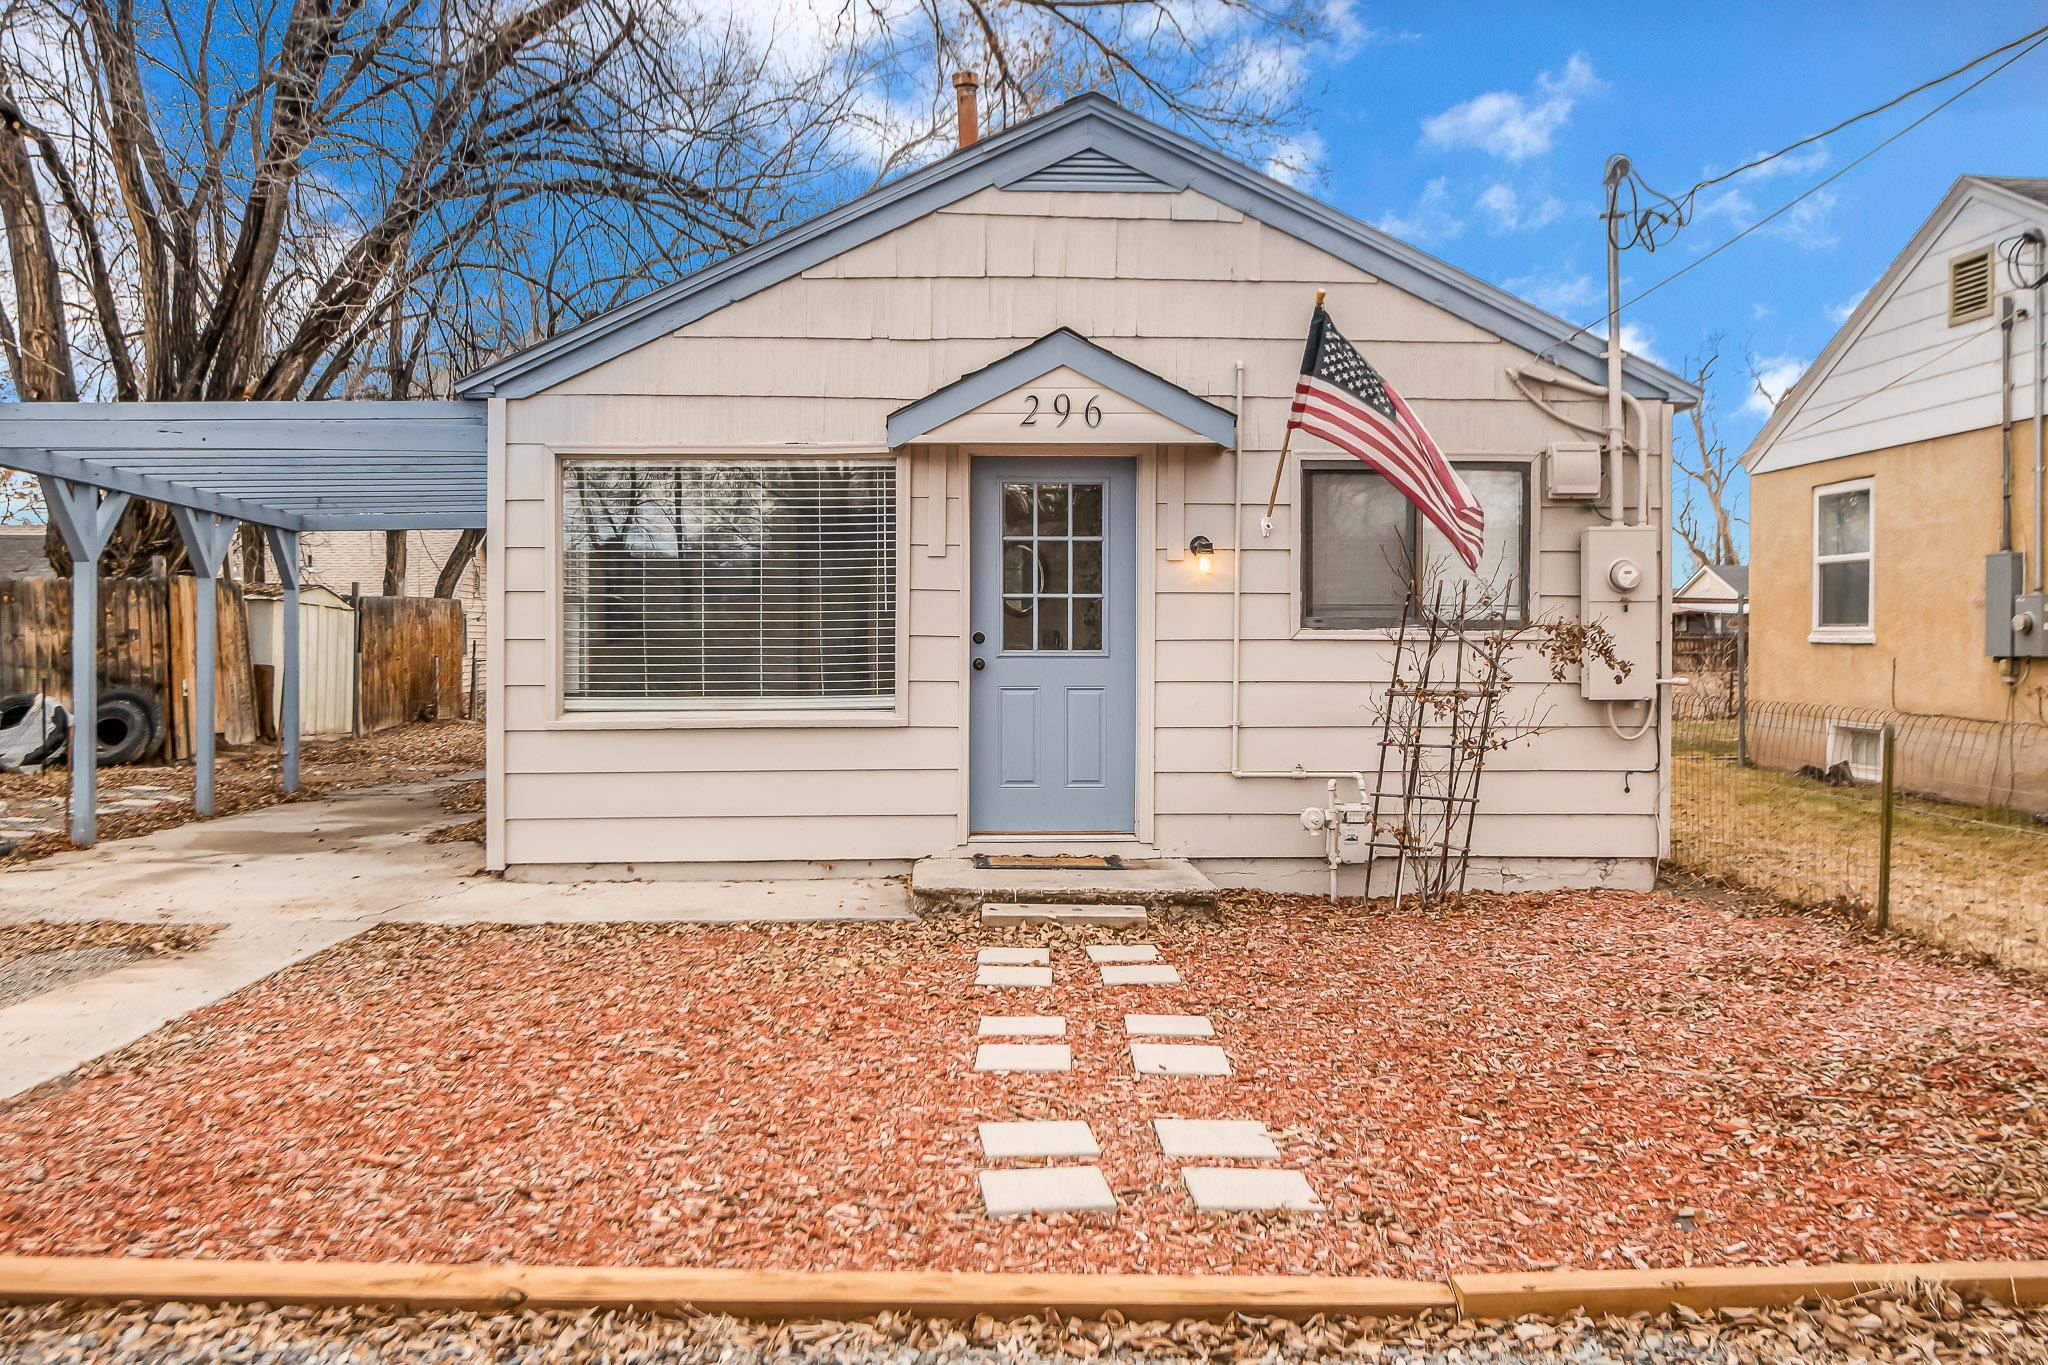 This updated 2 bedroom, 1 bathroom bungalow is ready for new owners! Updates include a new roof, furnace, appliances, water heater, plumbing, flooring, and interior paint. Schedule your showing today!